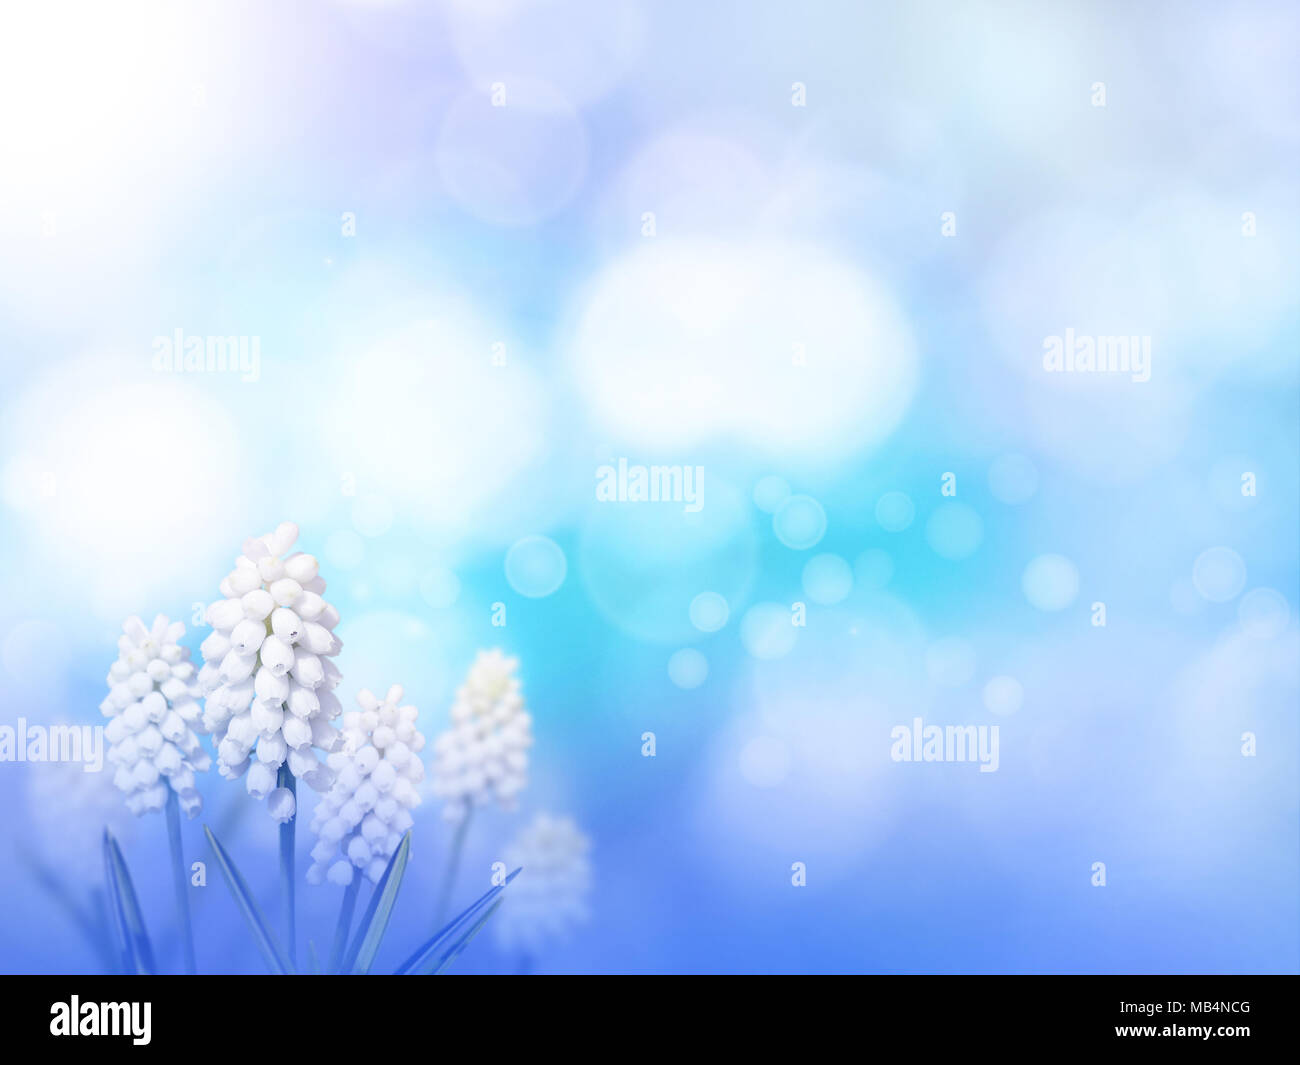 Muscari or grape hyacinth white flowers on the blue turquoise blurred background. Floral desktop. Stock Photo